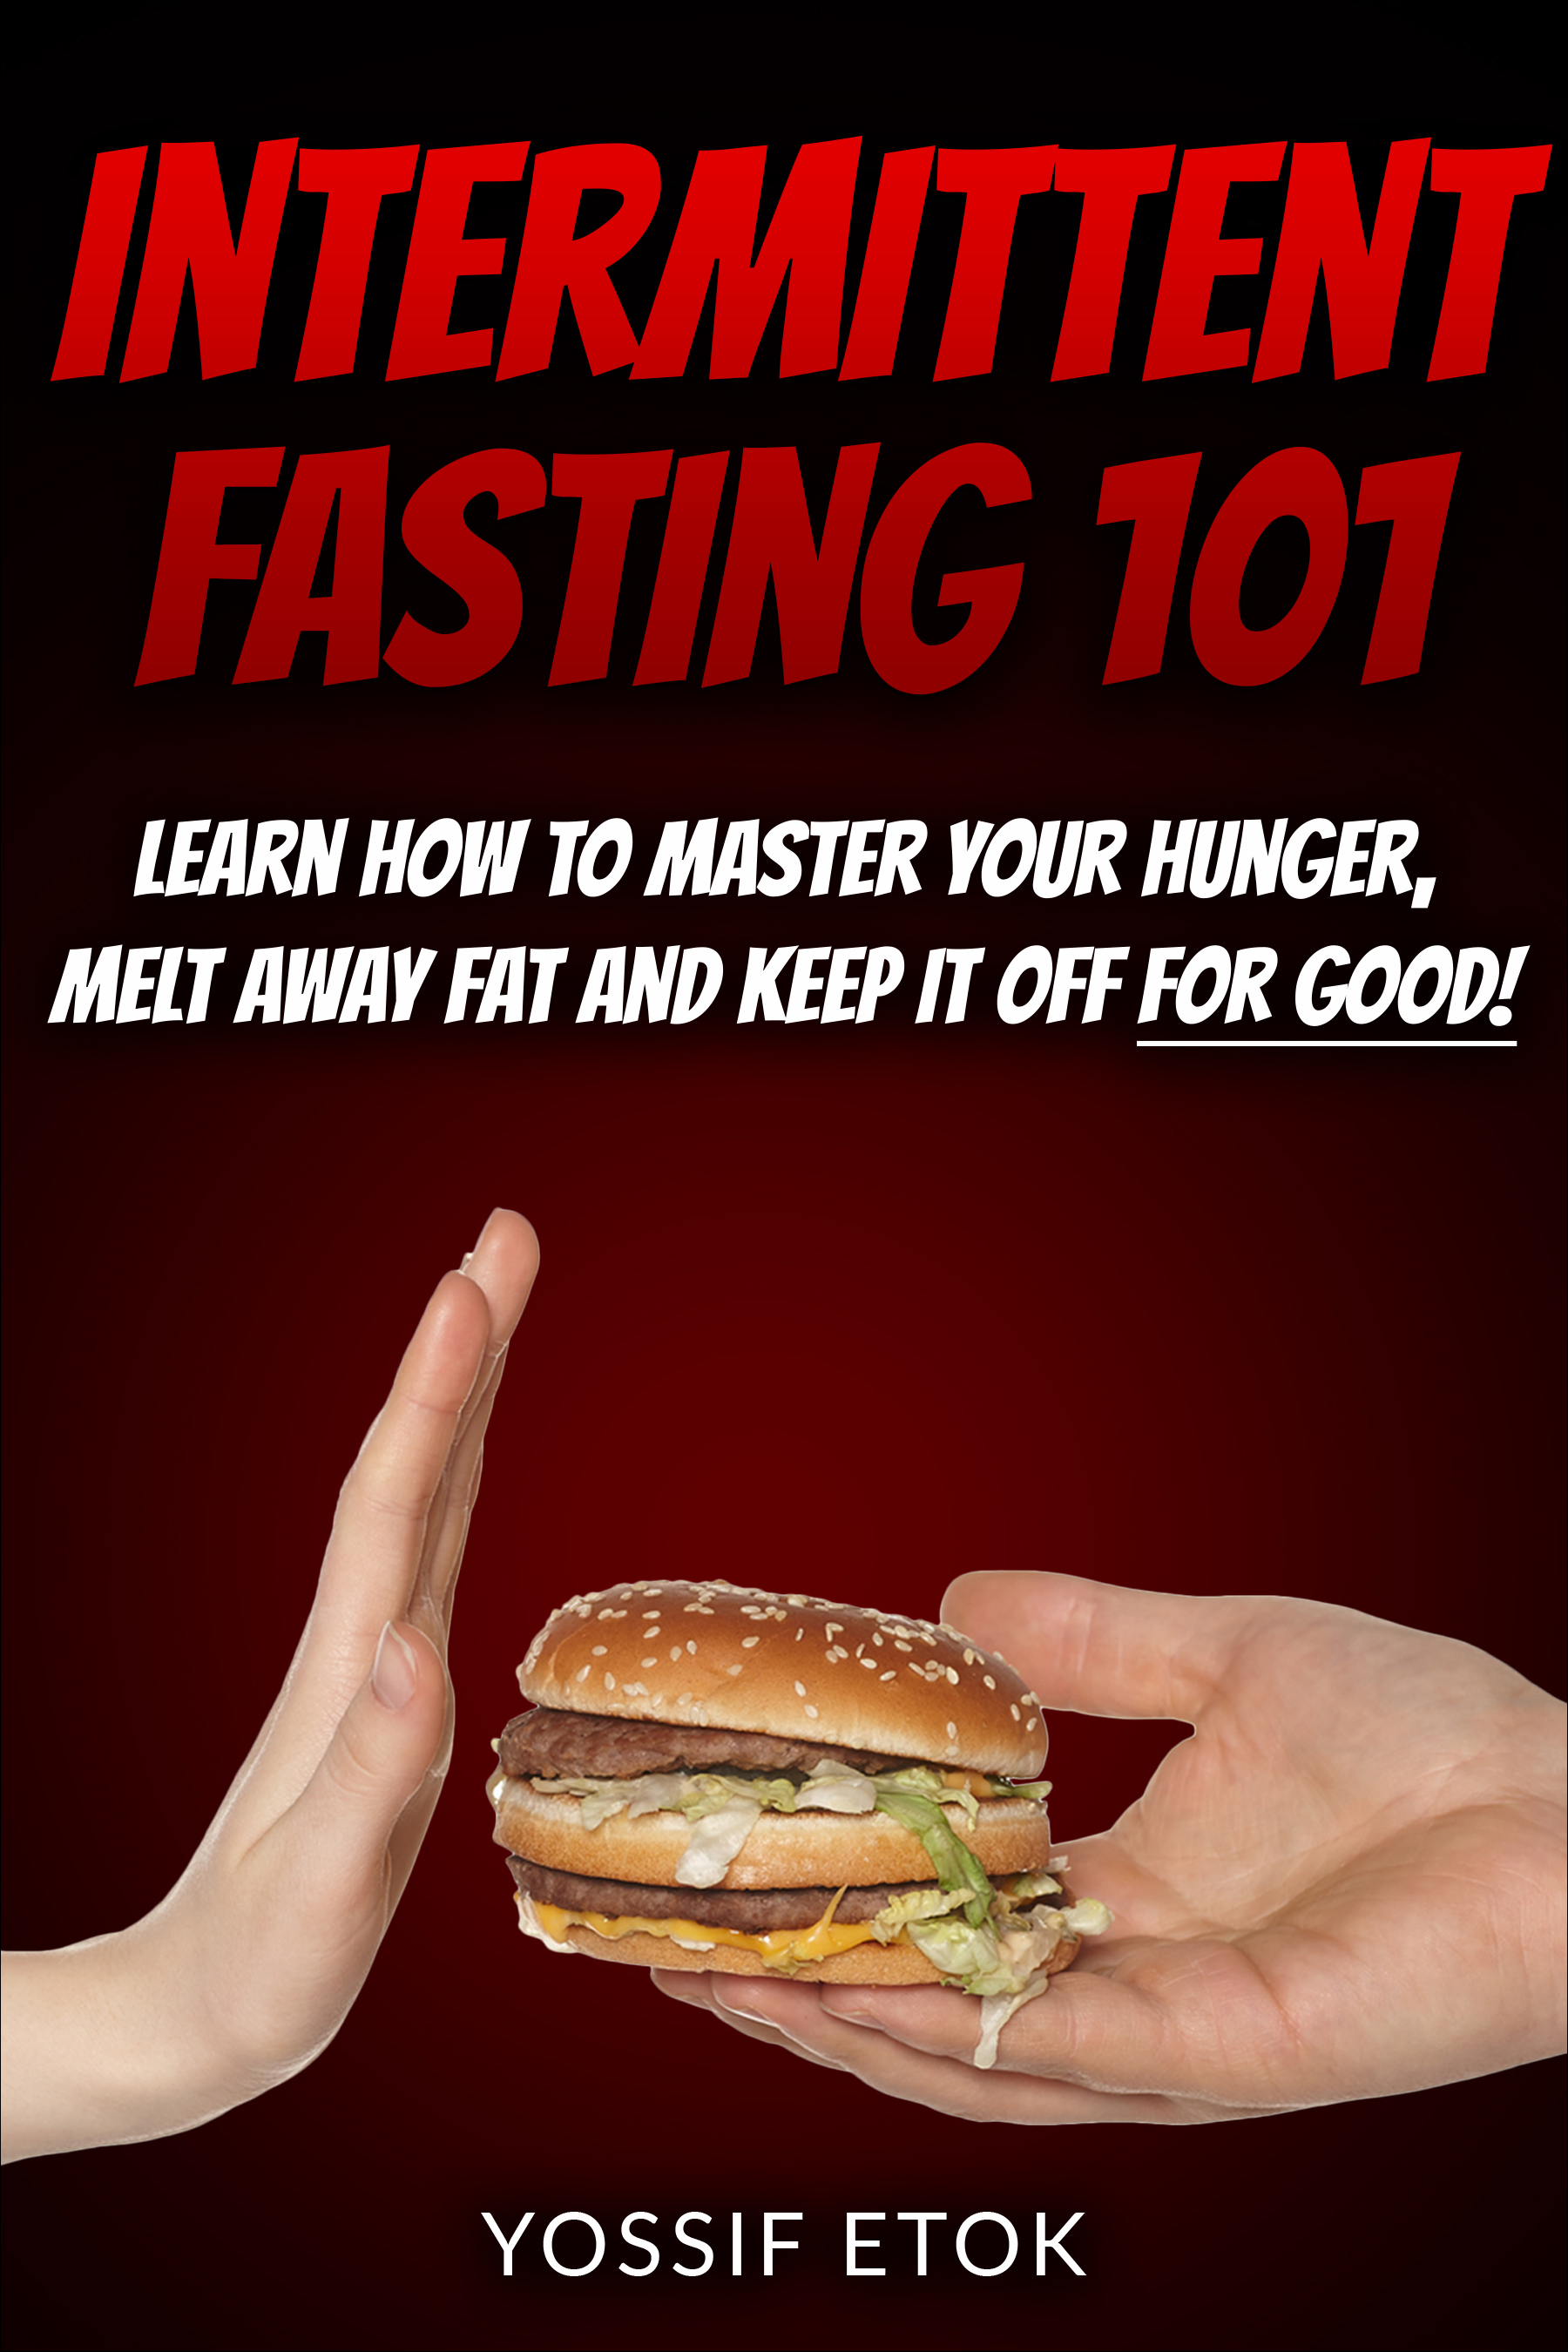 FREE: Intermittent Fasting 101: Learn how to master your hunger, melt away fat and keep it off for good! by Yossif Etok